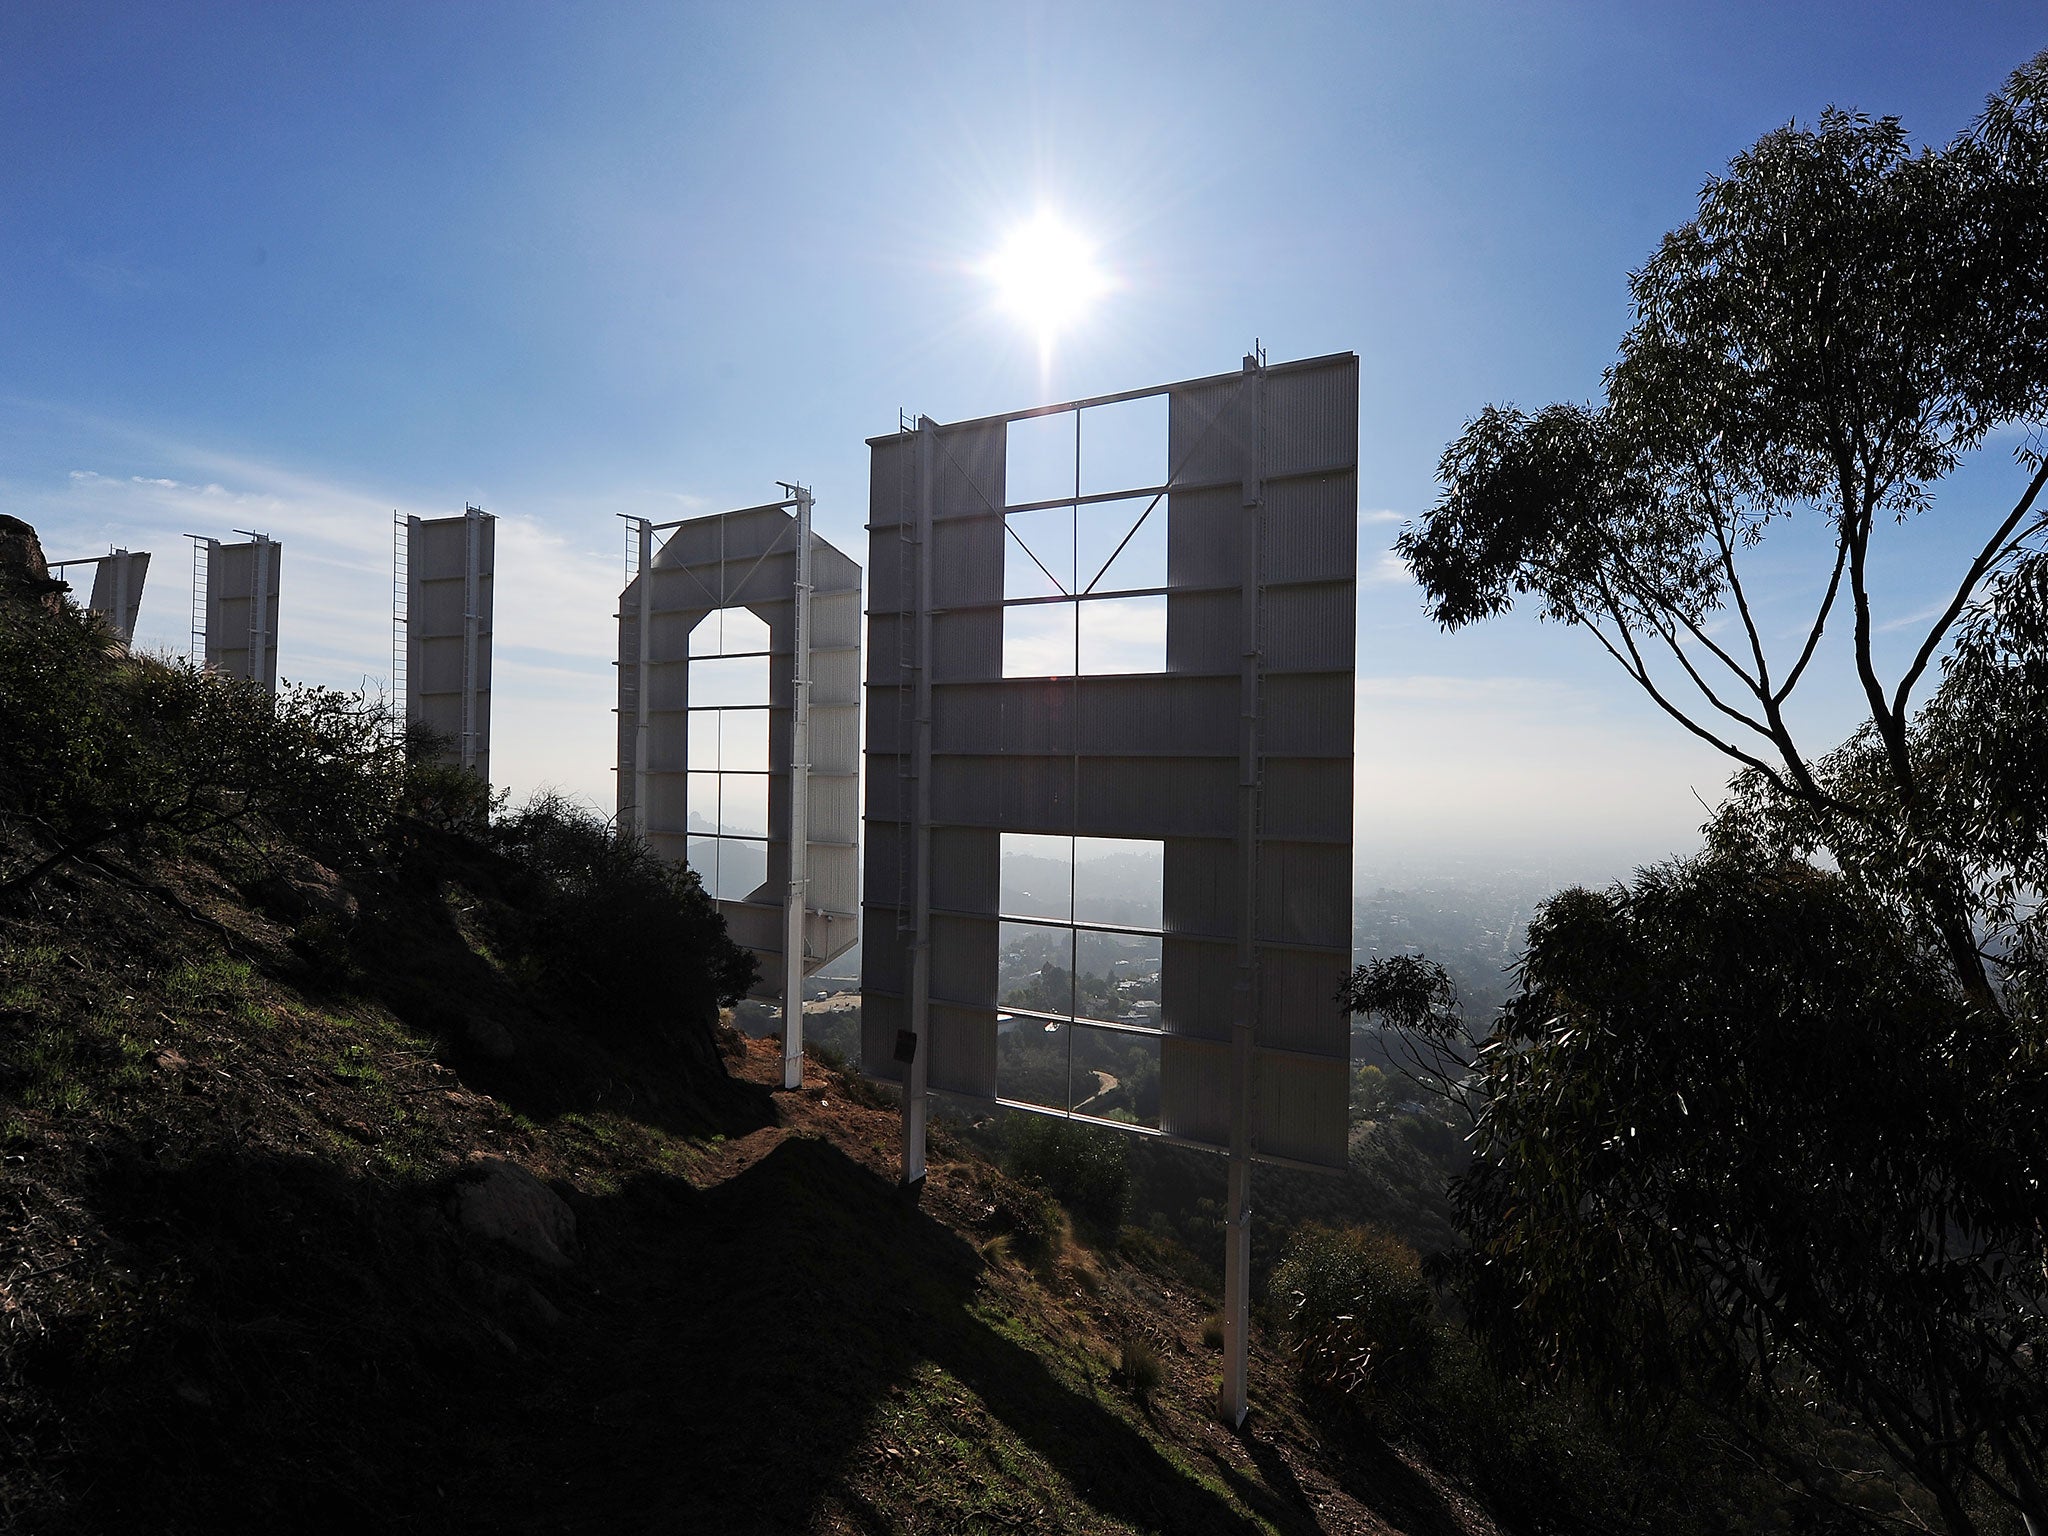 The Hollywood Sign is one of several famous landmarks which cannot be photographed under trademark laws